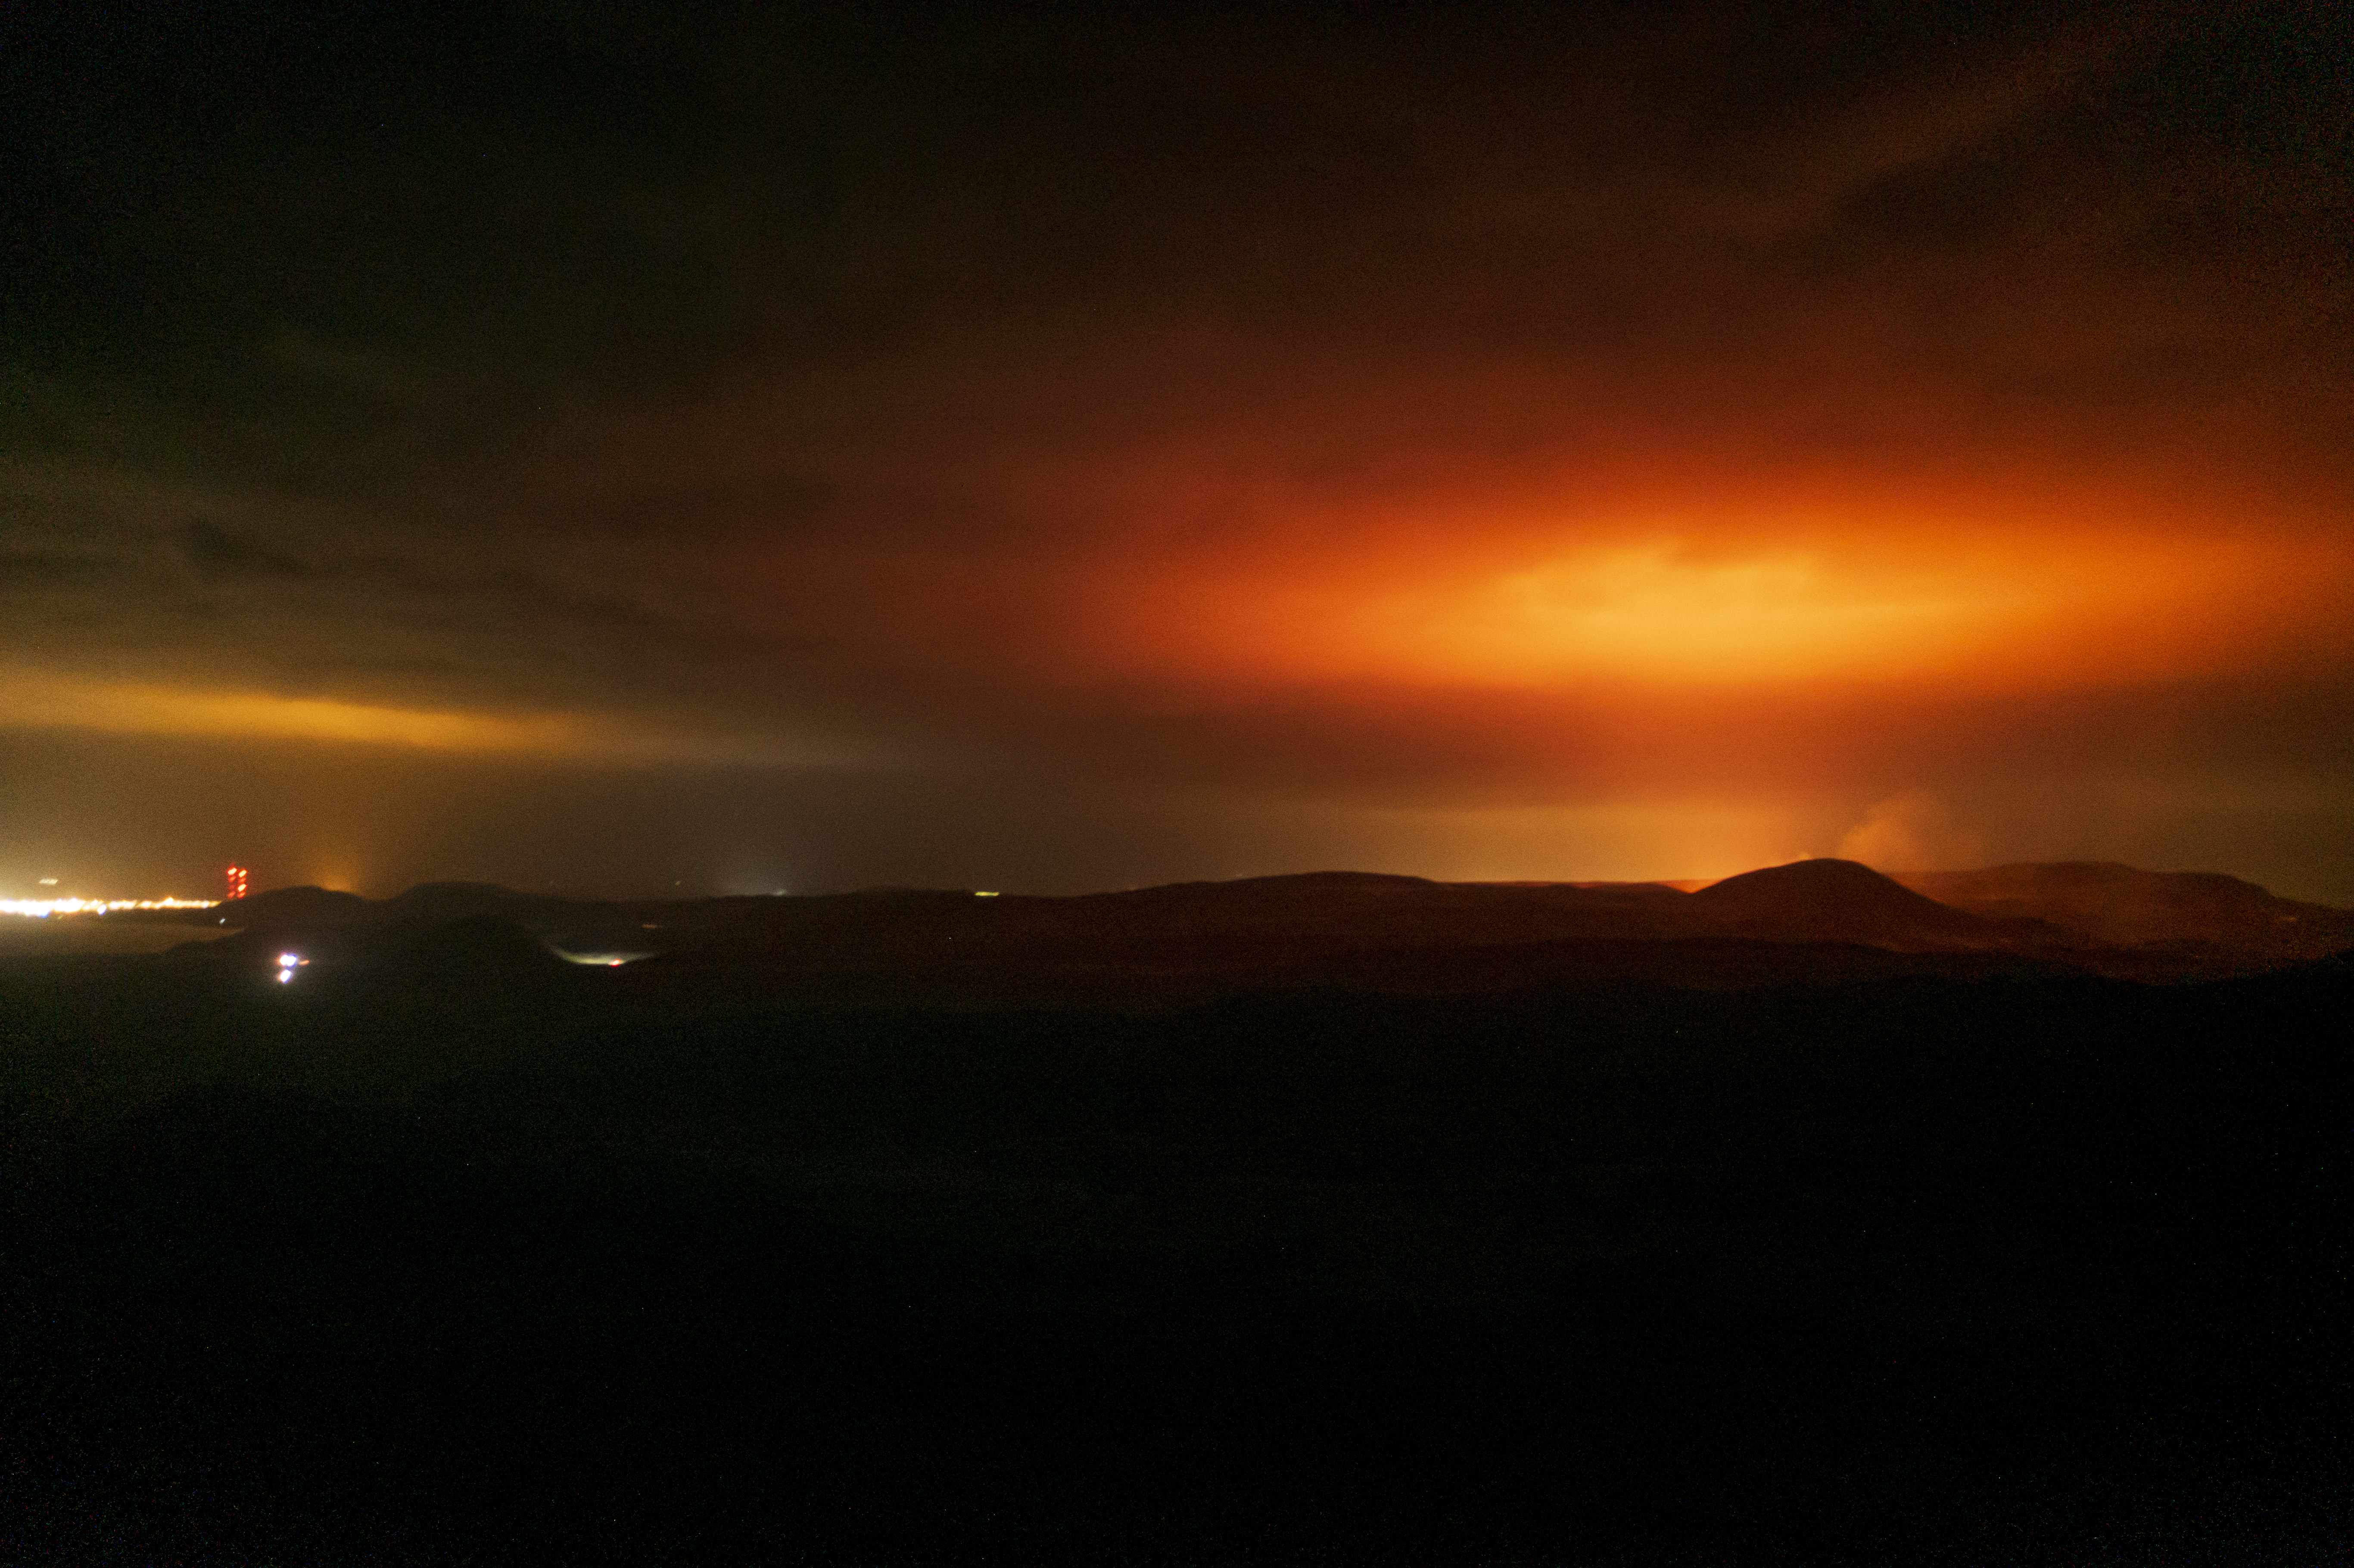 The red glare from the volcano eruption lights the night sky over Grindavik (L) on the Reykjanes Peninsula, Iceland, early 20 March 2021 (picture taken with a drone). A volcanic eruption at Geldingadalur, close to Fagradalsfjall, shattered Iceland in the night of 19 to 20 March 2021 following a series of small quakes, monitored and documented by the Islandic Meteorological Office (IMO). EPA-EFE/GOLLI / ICELANDREVIEW 